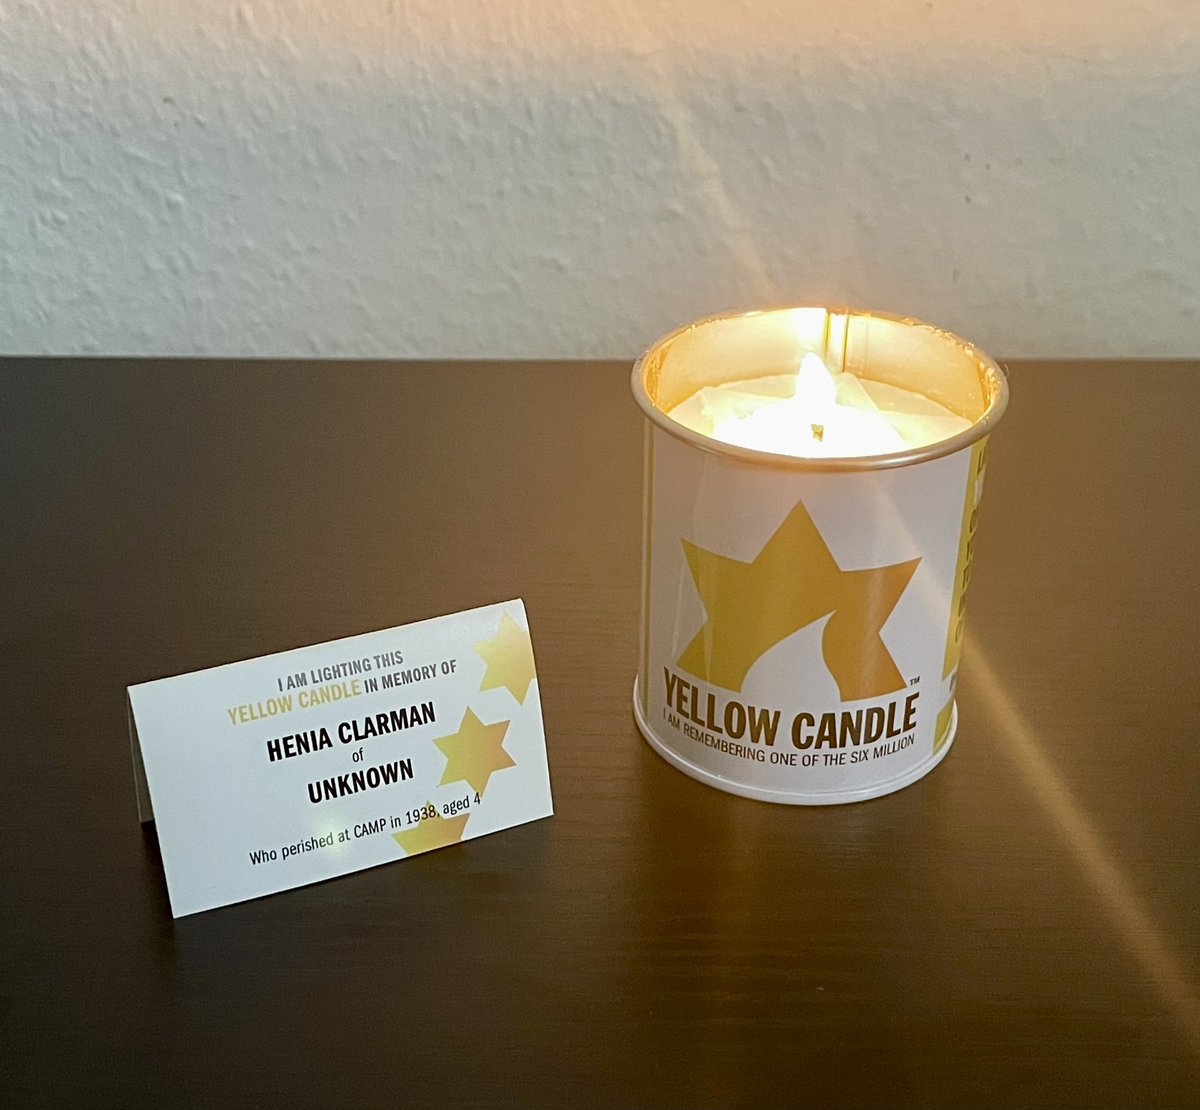 This evening, we light a #yellowcandle in memory of Henia Clarman, who was murdered in 1938, aged 4. We are also lighting to remember the 6 million Jewish people who perished during the Holocaust. @YellowCandleUK @maccabigb